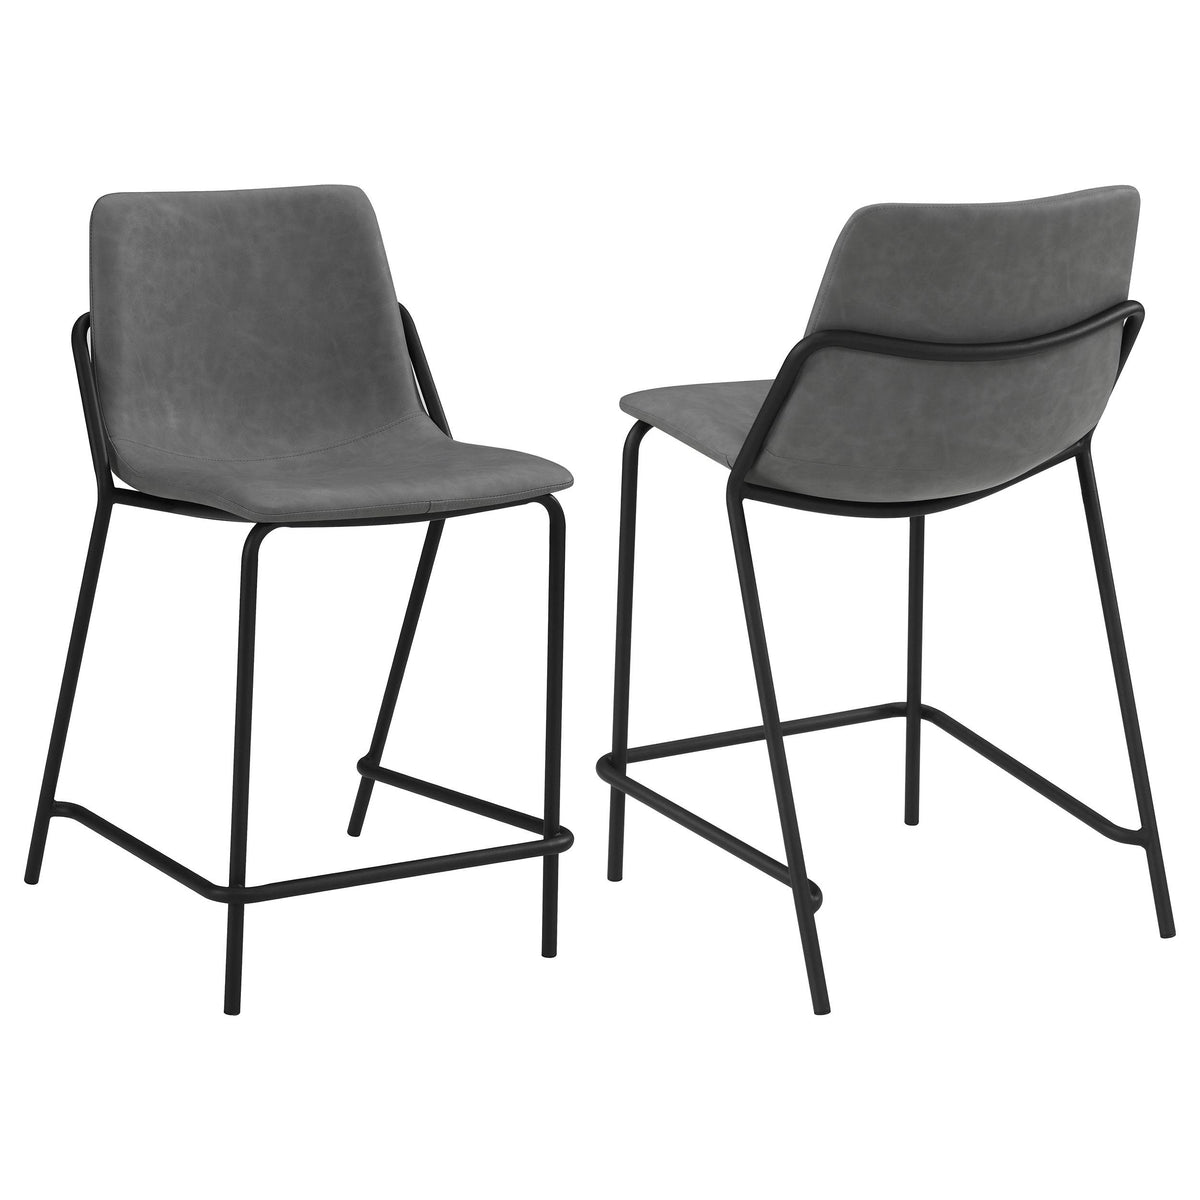 Earnest Solid Back Upholstered Counter Height Stools Grey and Black (Set of 2) Earnest Solid Back Upholstered Counter Height Stools Grey and Black (Set of 2) Half Price Furniture